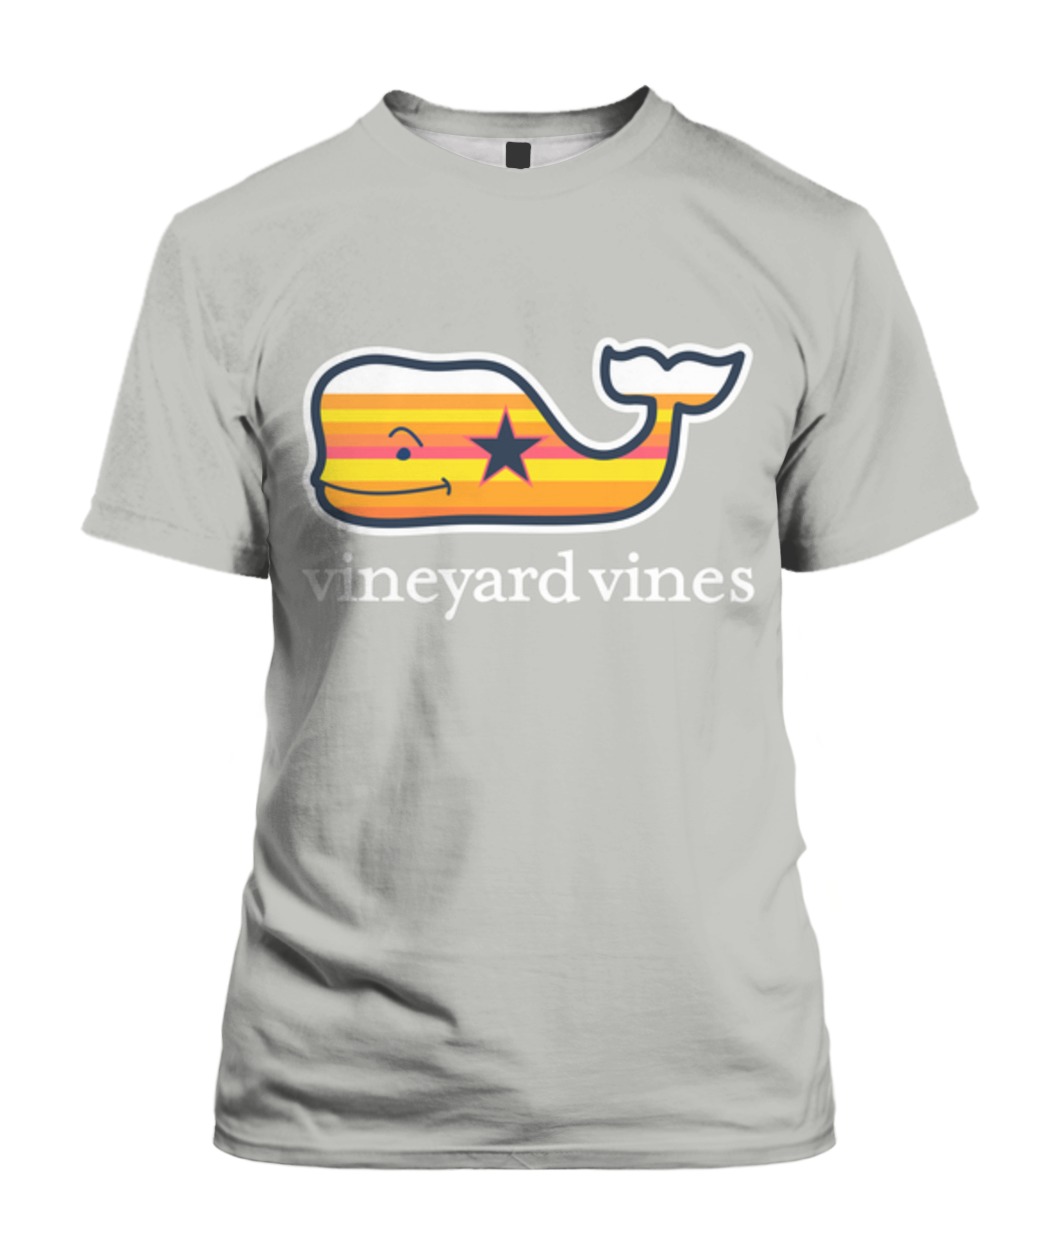 Houston Astros Vineyard Vines Filled In Whale 